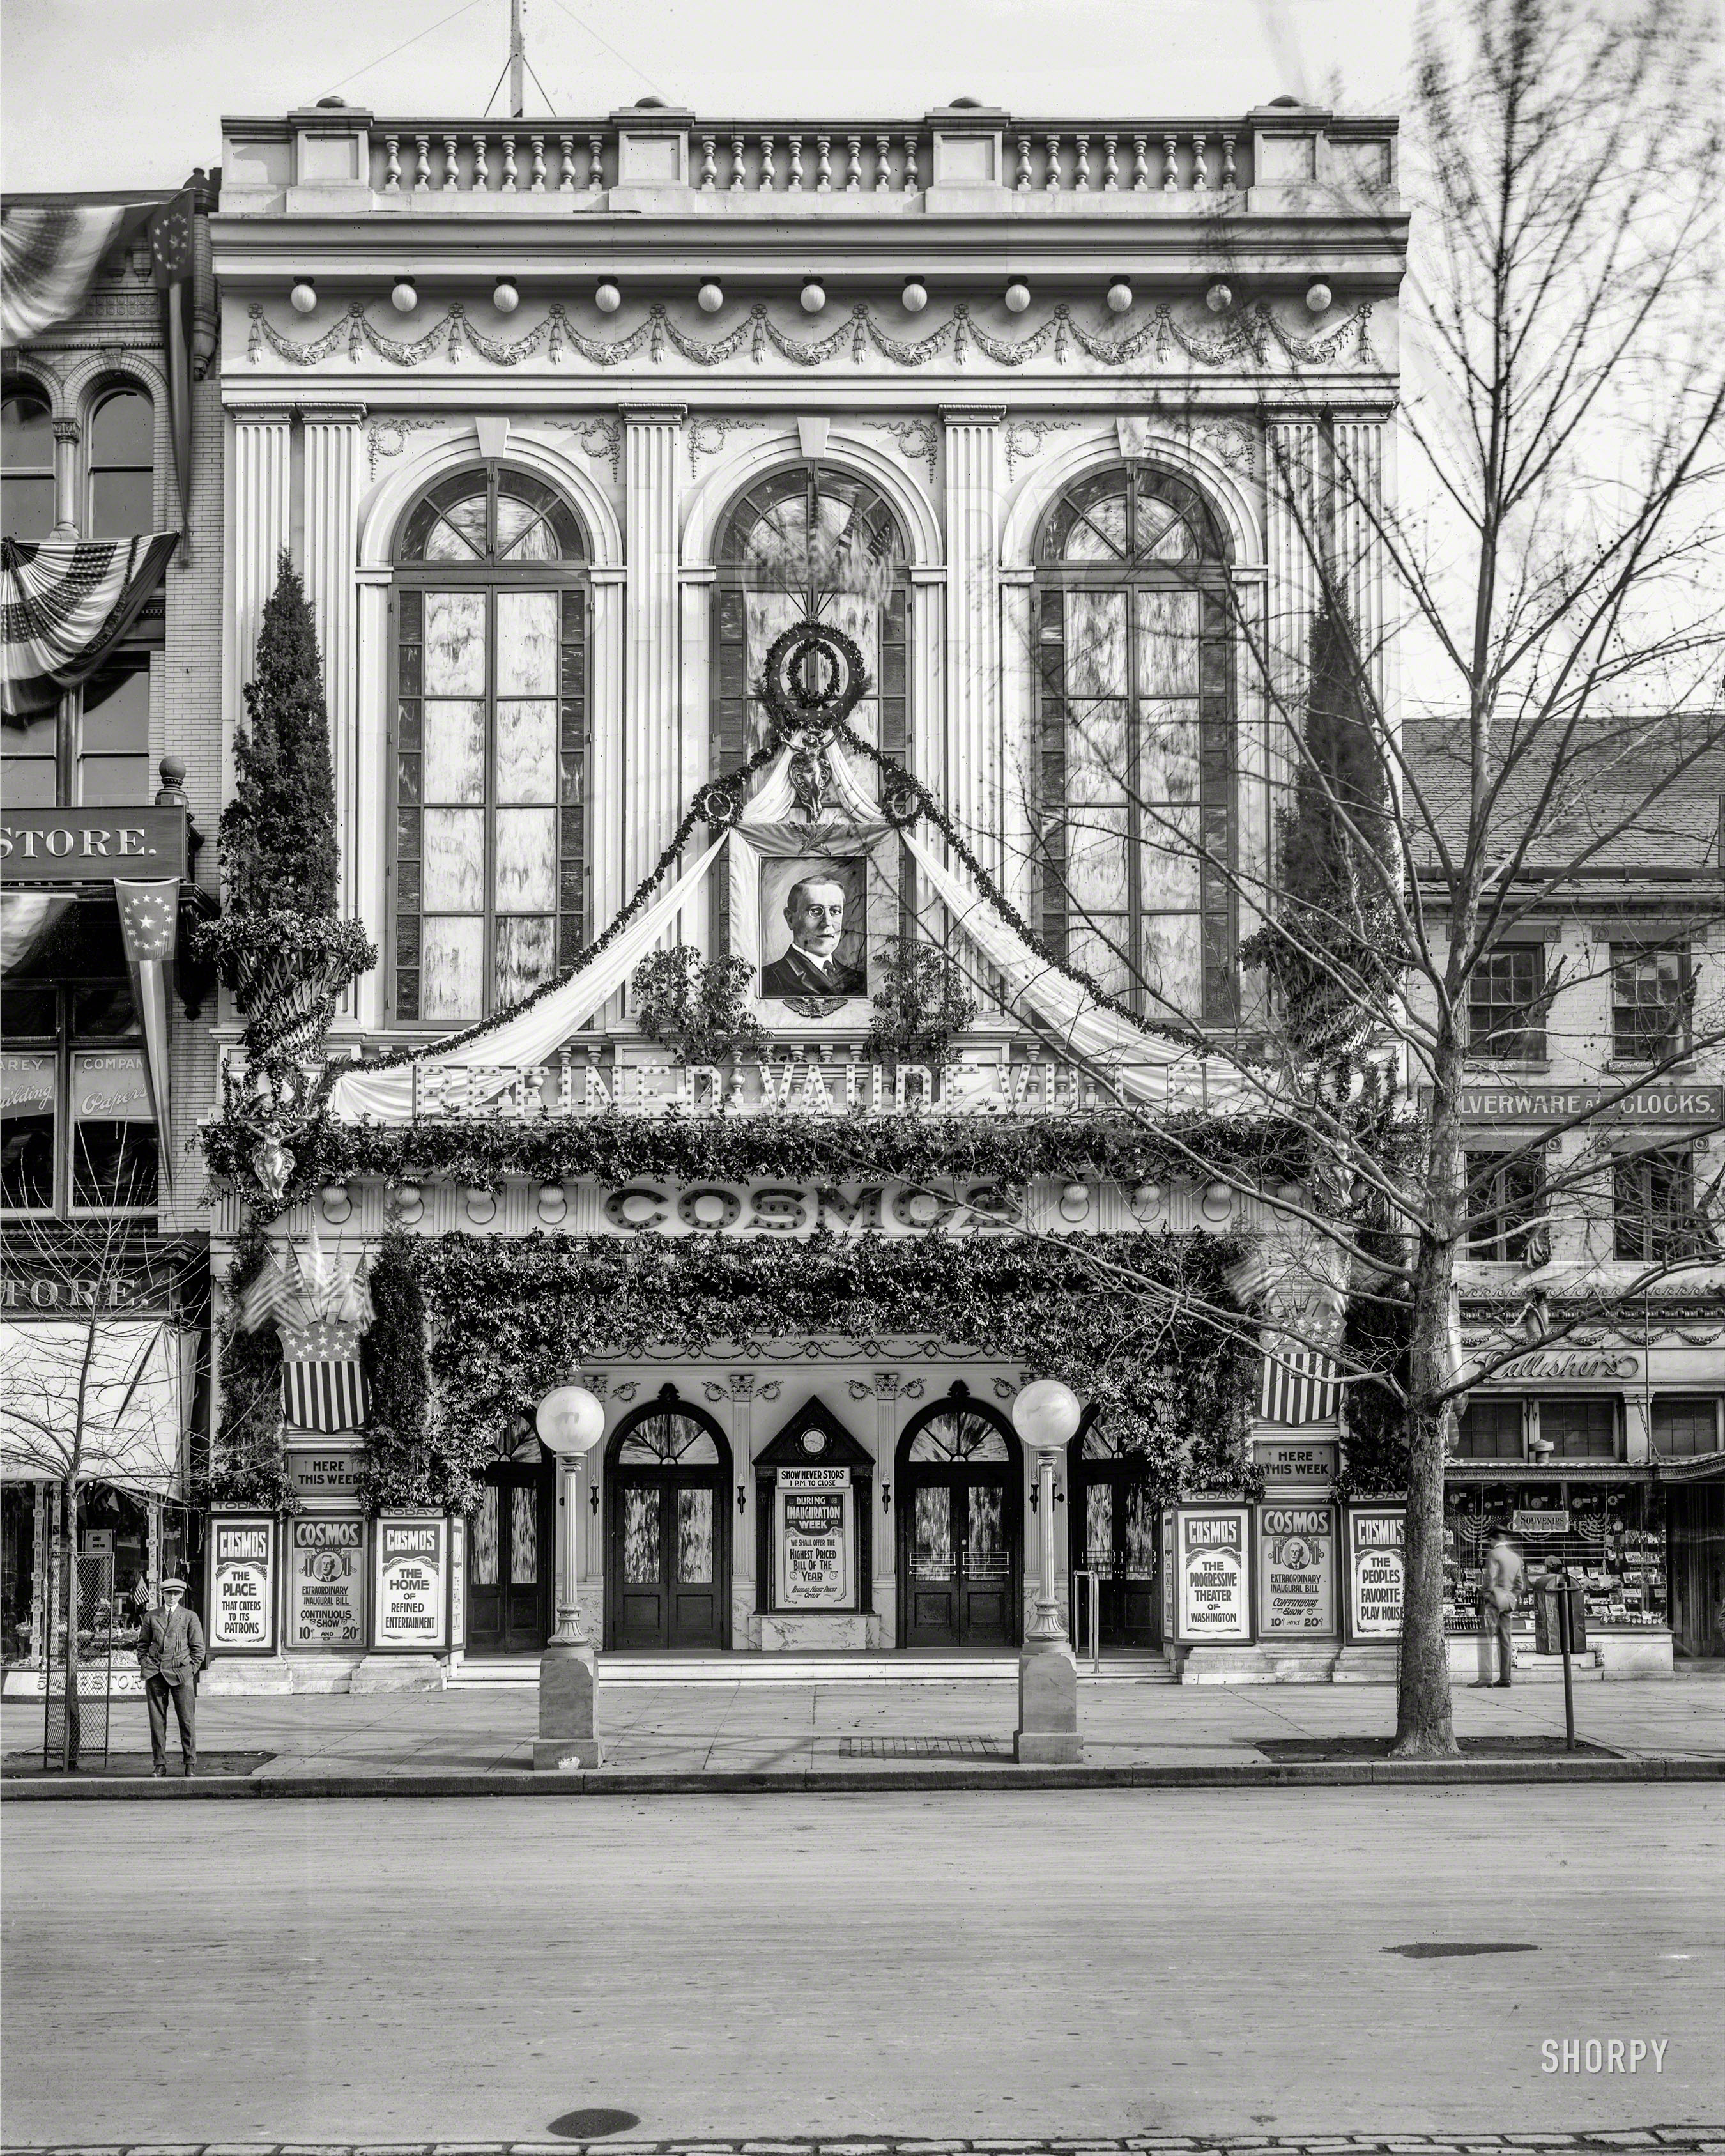 March 1917. Washington, D.C. "Cosmos Theater, Pennsylvania Avenue. Inauguration Week bill." The home of "Refined Vaudeville," with Woodrow Wilson over the marquee. 8x10 inch glass negative, National Photo Co. View full size.